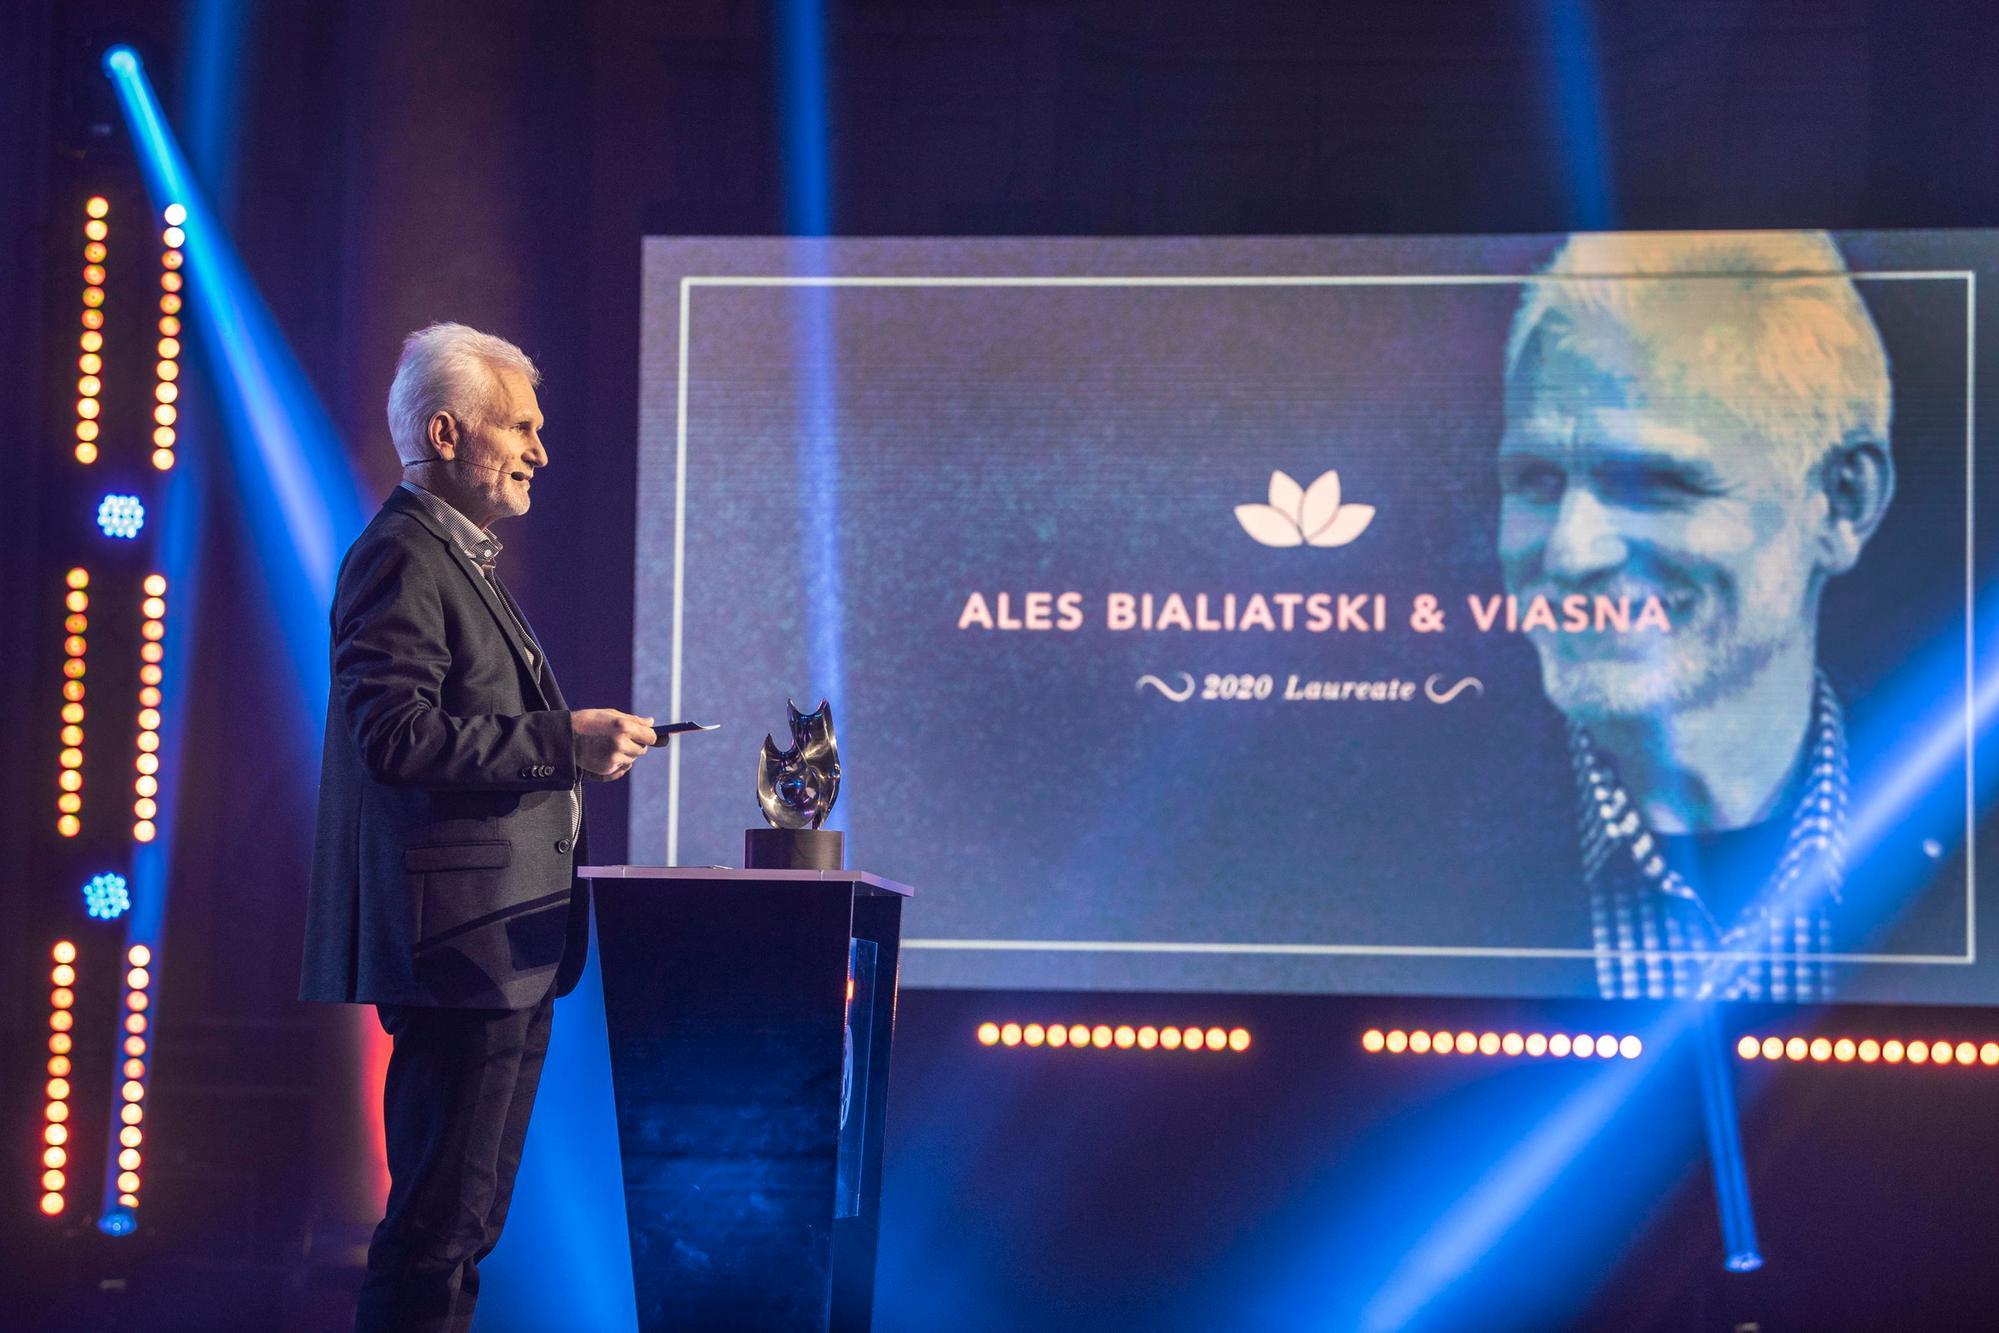 Belarusian Democracy activist of Human Rights organization Vjasna Ales Bialiatski speaks after receiving the 2020 Right Livelihood Award in Stockholm, Sweden, 03 December 2020. Bialiatski was the only one of four prize winners, including Iranian human rights lawyer Nasrin Sotoudeh, US lawyer and activist Bryan Stevenson and Nicaraguan lawyer Lottie Cunningham Wren, to be present in Stockholm for the digital award ceremony. ANSA/ANDERS WIKLUND SWEDEN OUT